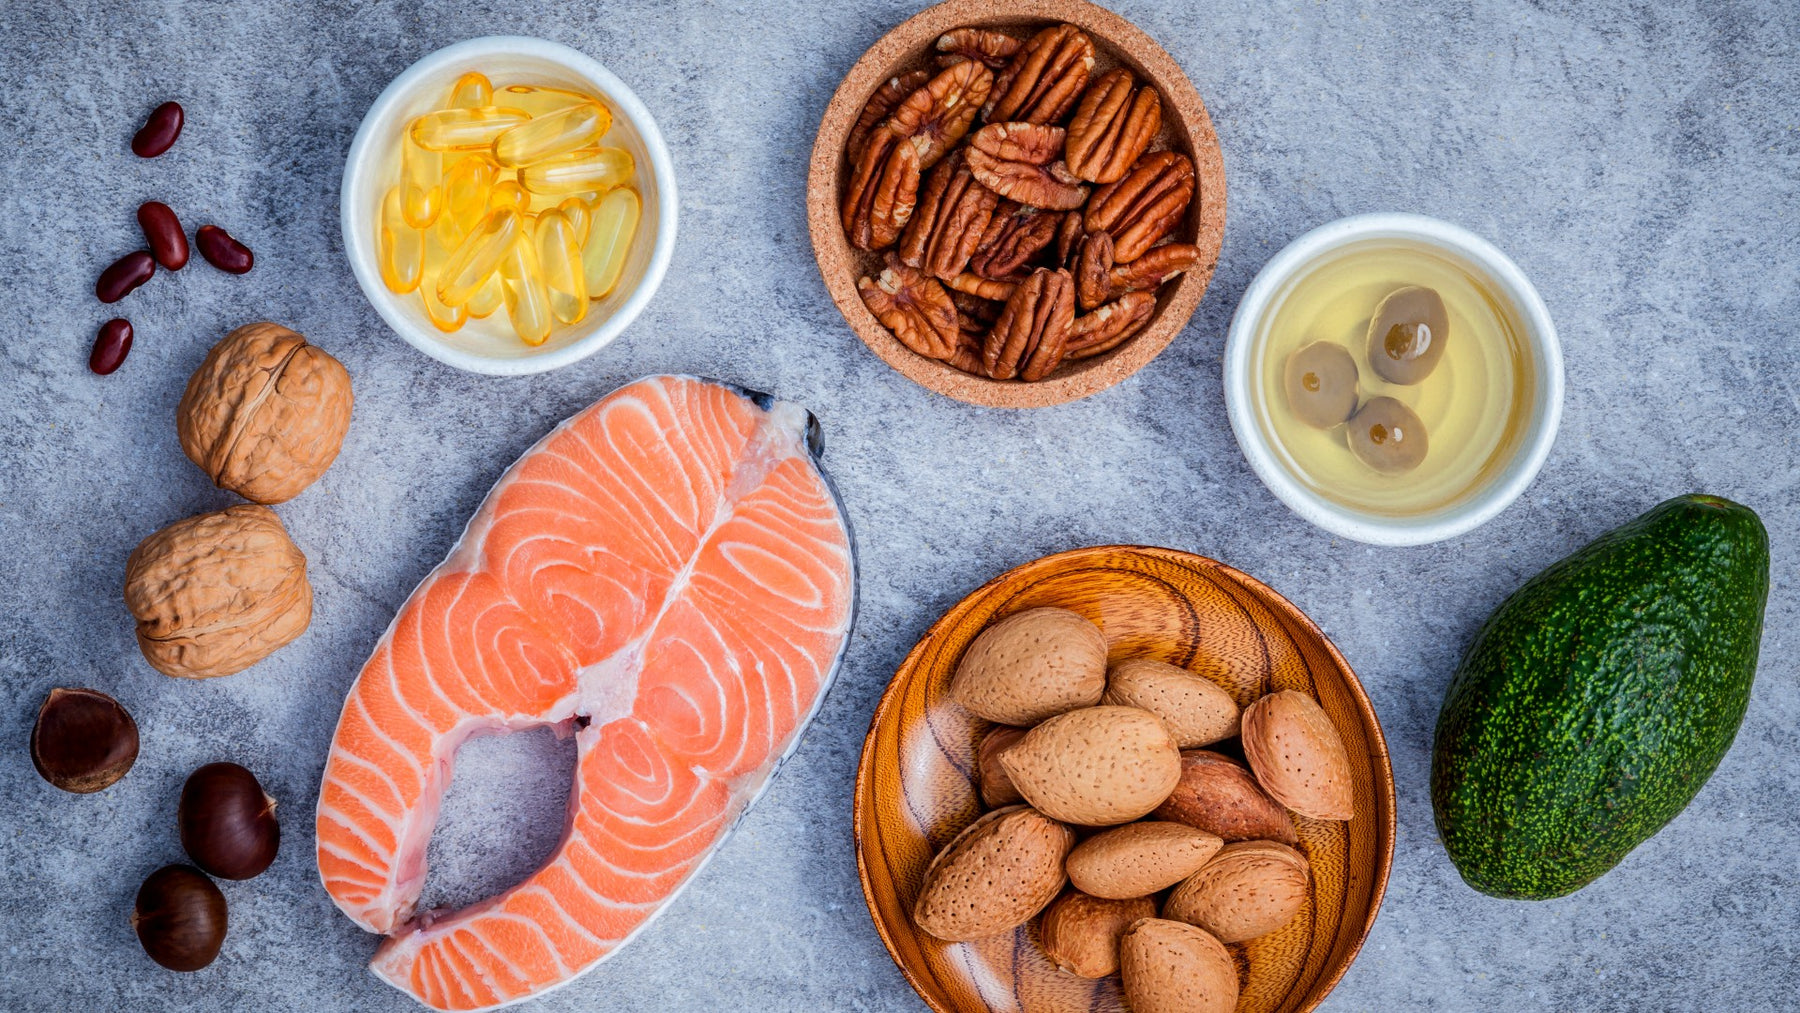 10 Vitamin D Foods You Should Be Eating